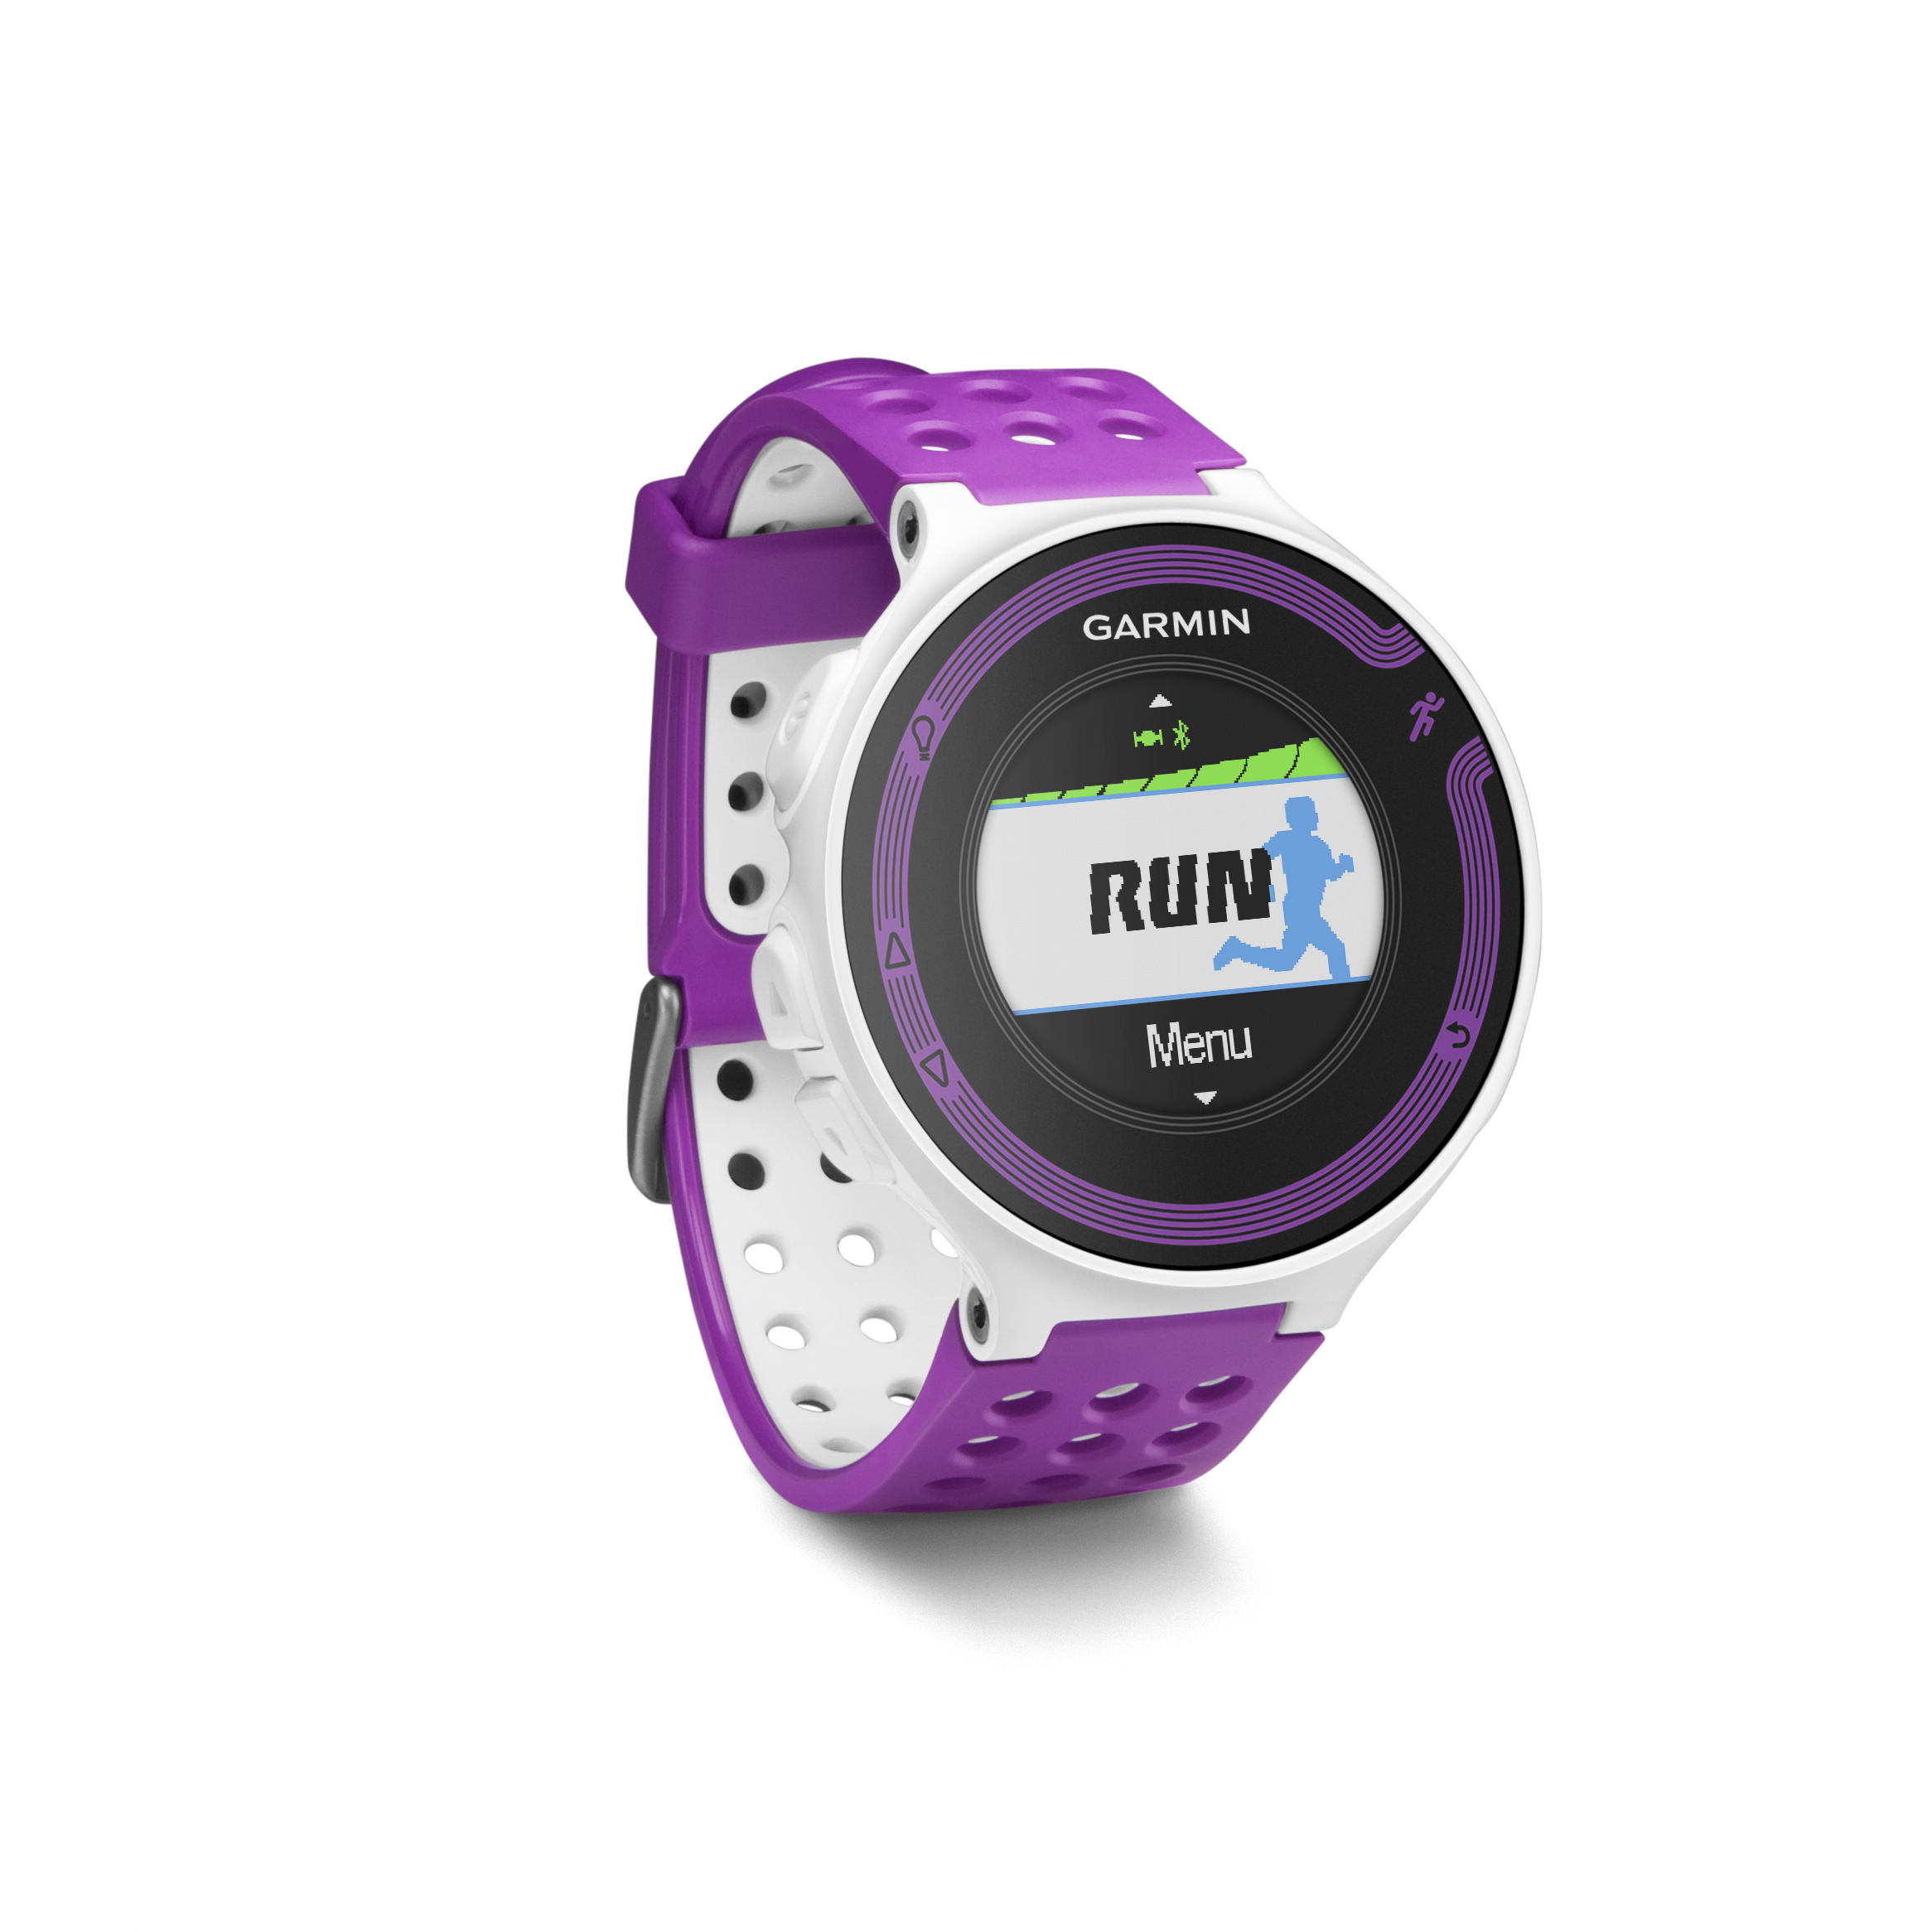 There's A Coach In Every Watch— Forerunner® 620 and 220 With Color Display - Garmin Blog